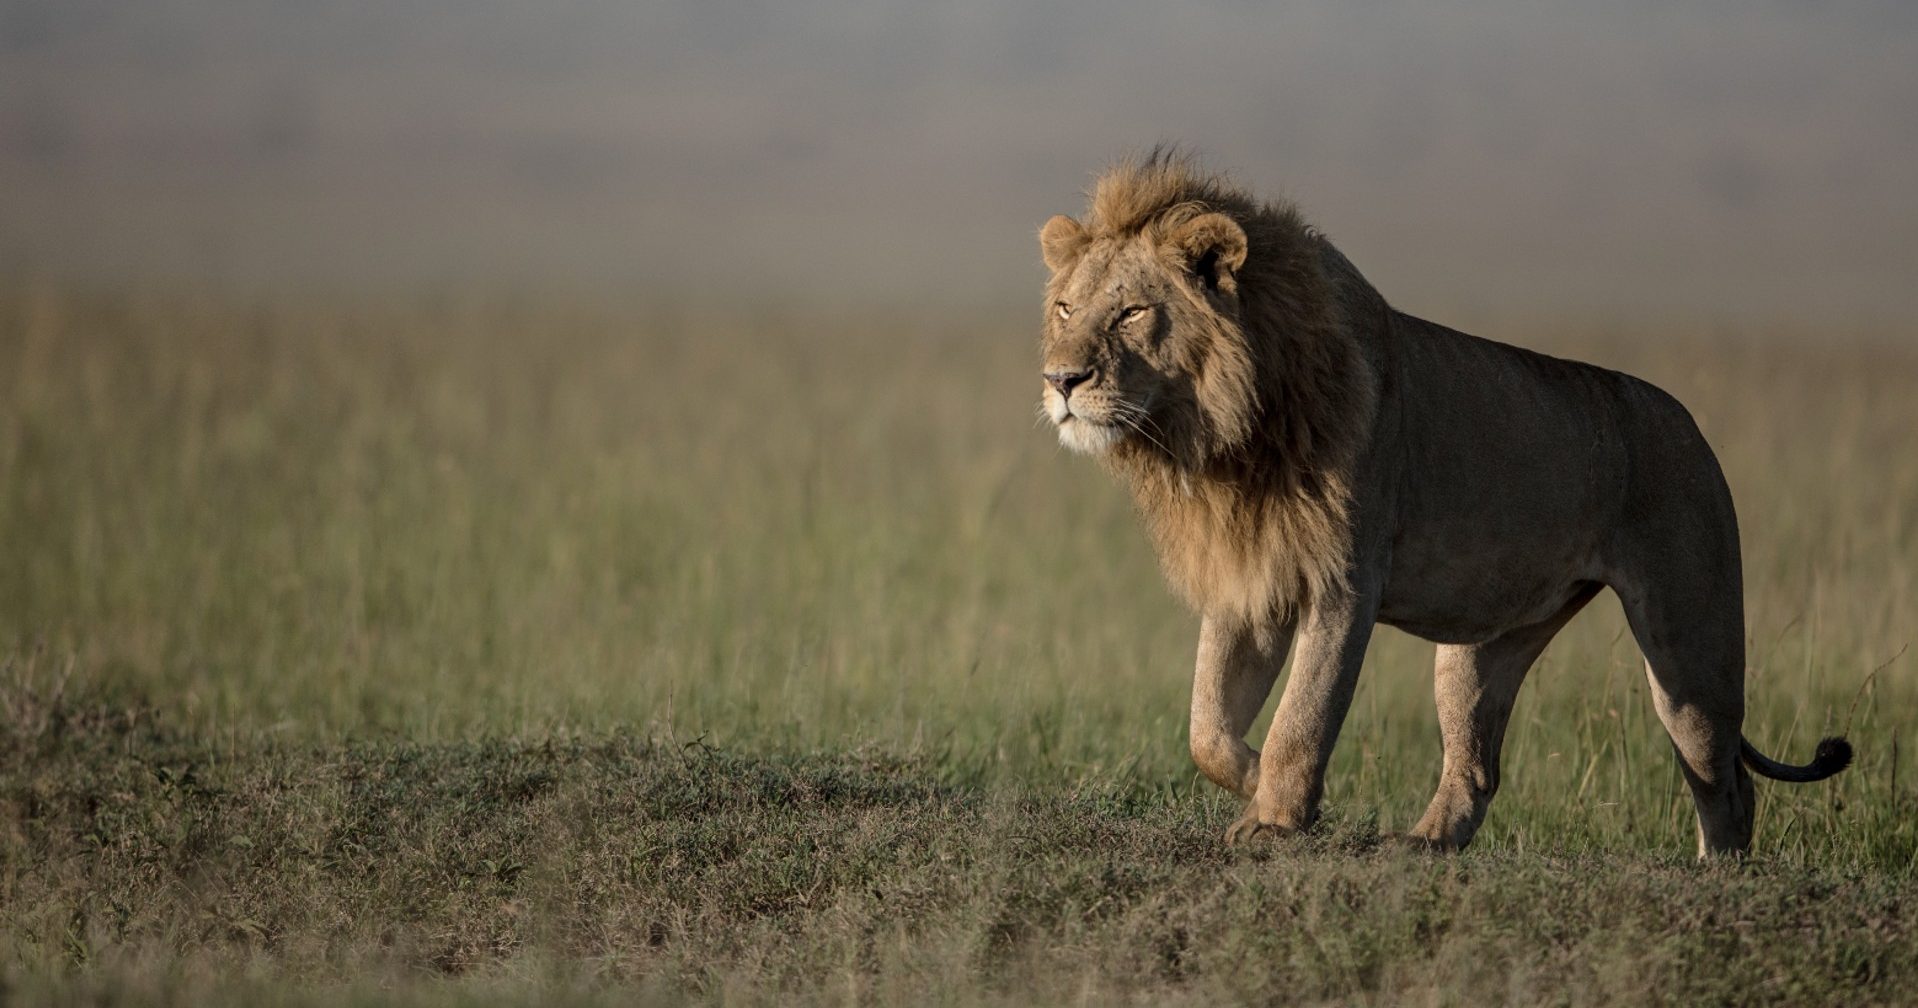 Lions: Facts, behavior and news